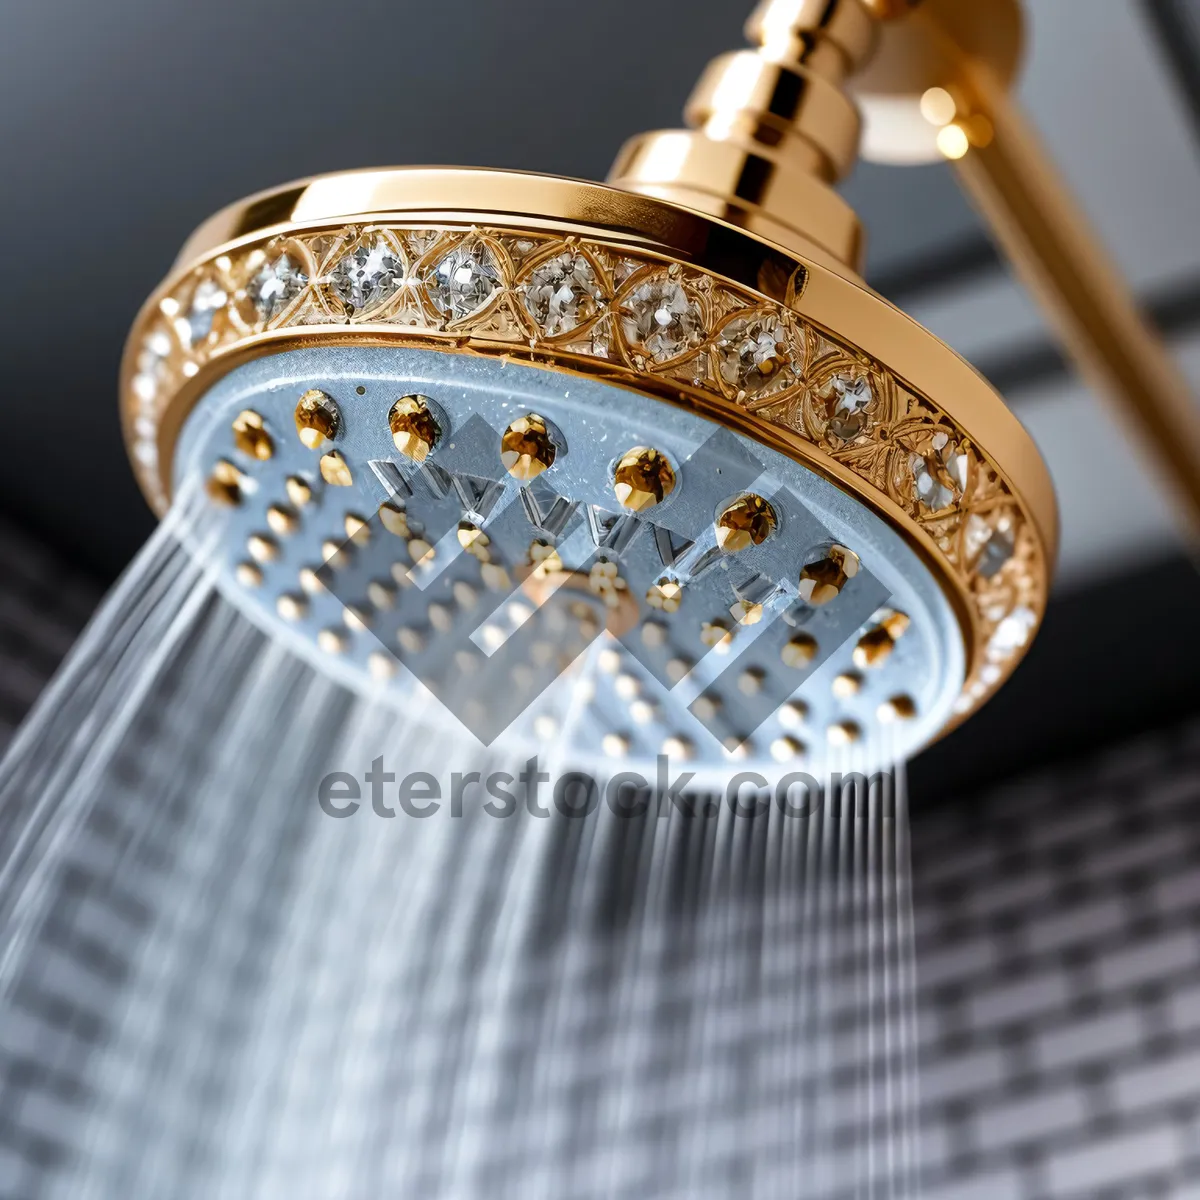 Picture of Shower Decor Strainer: Holiday Plumbing Fixture with Filter